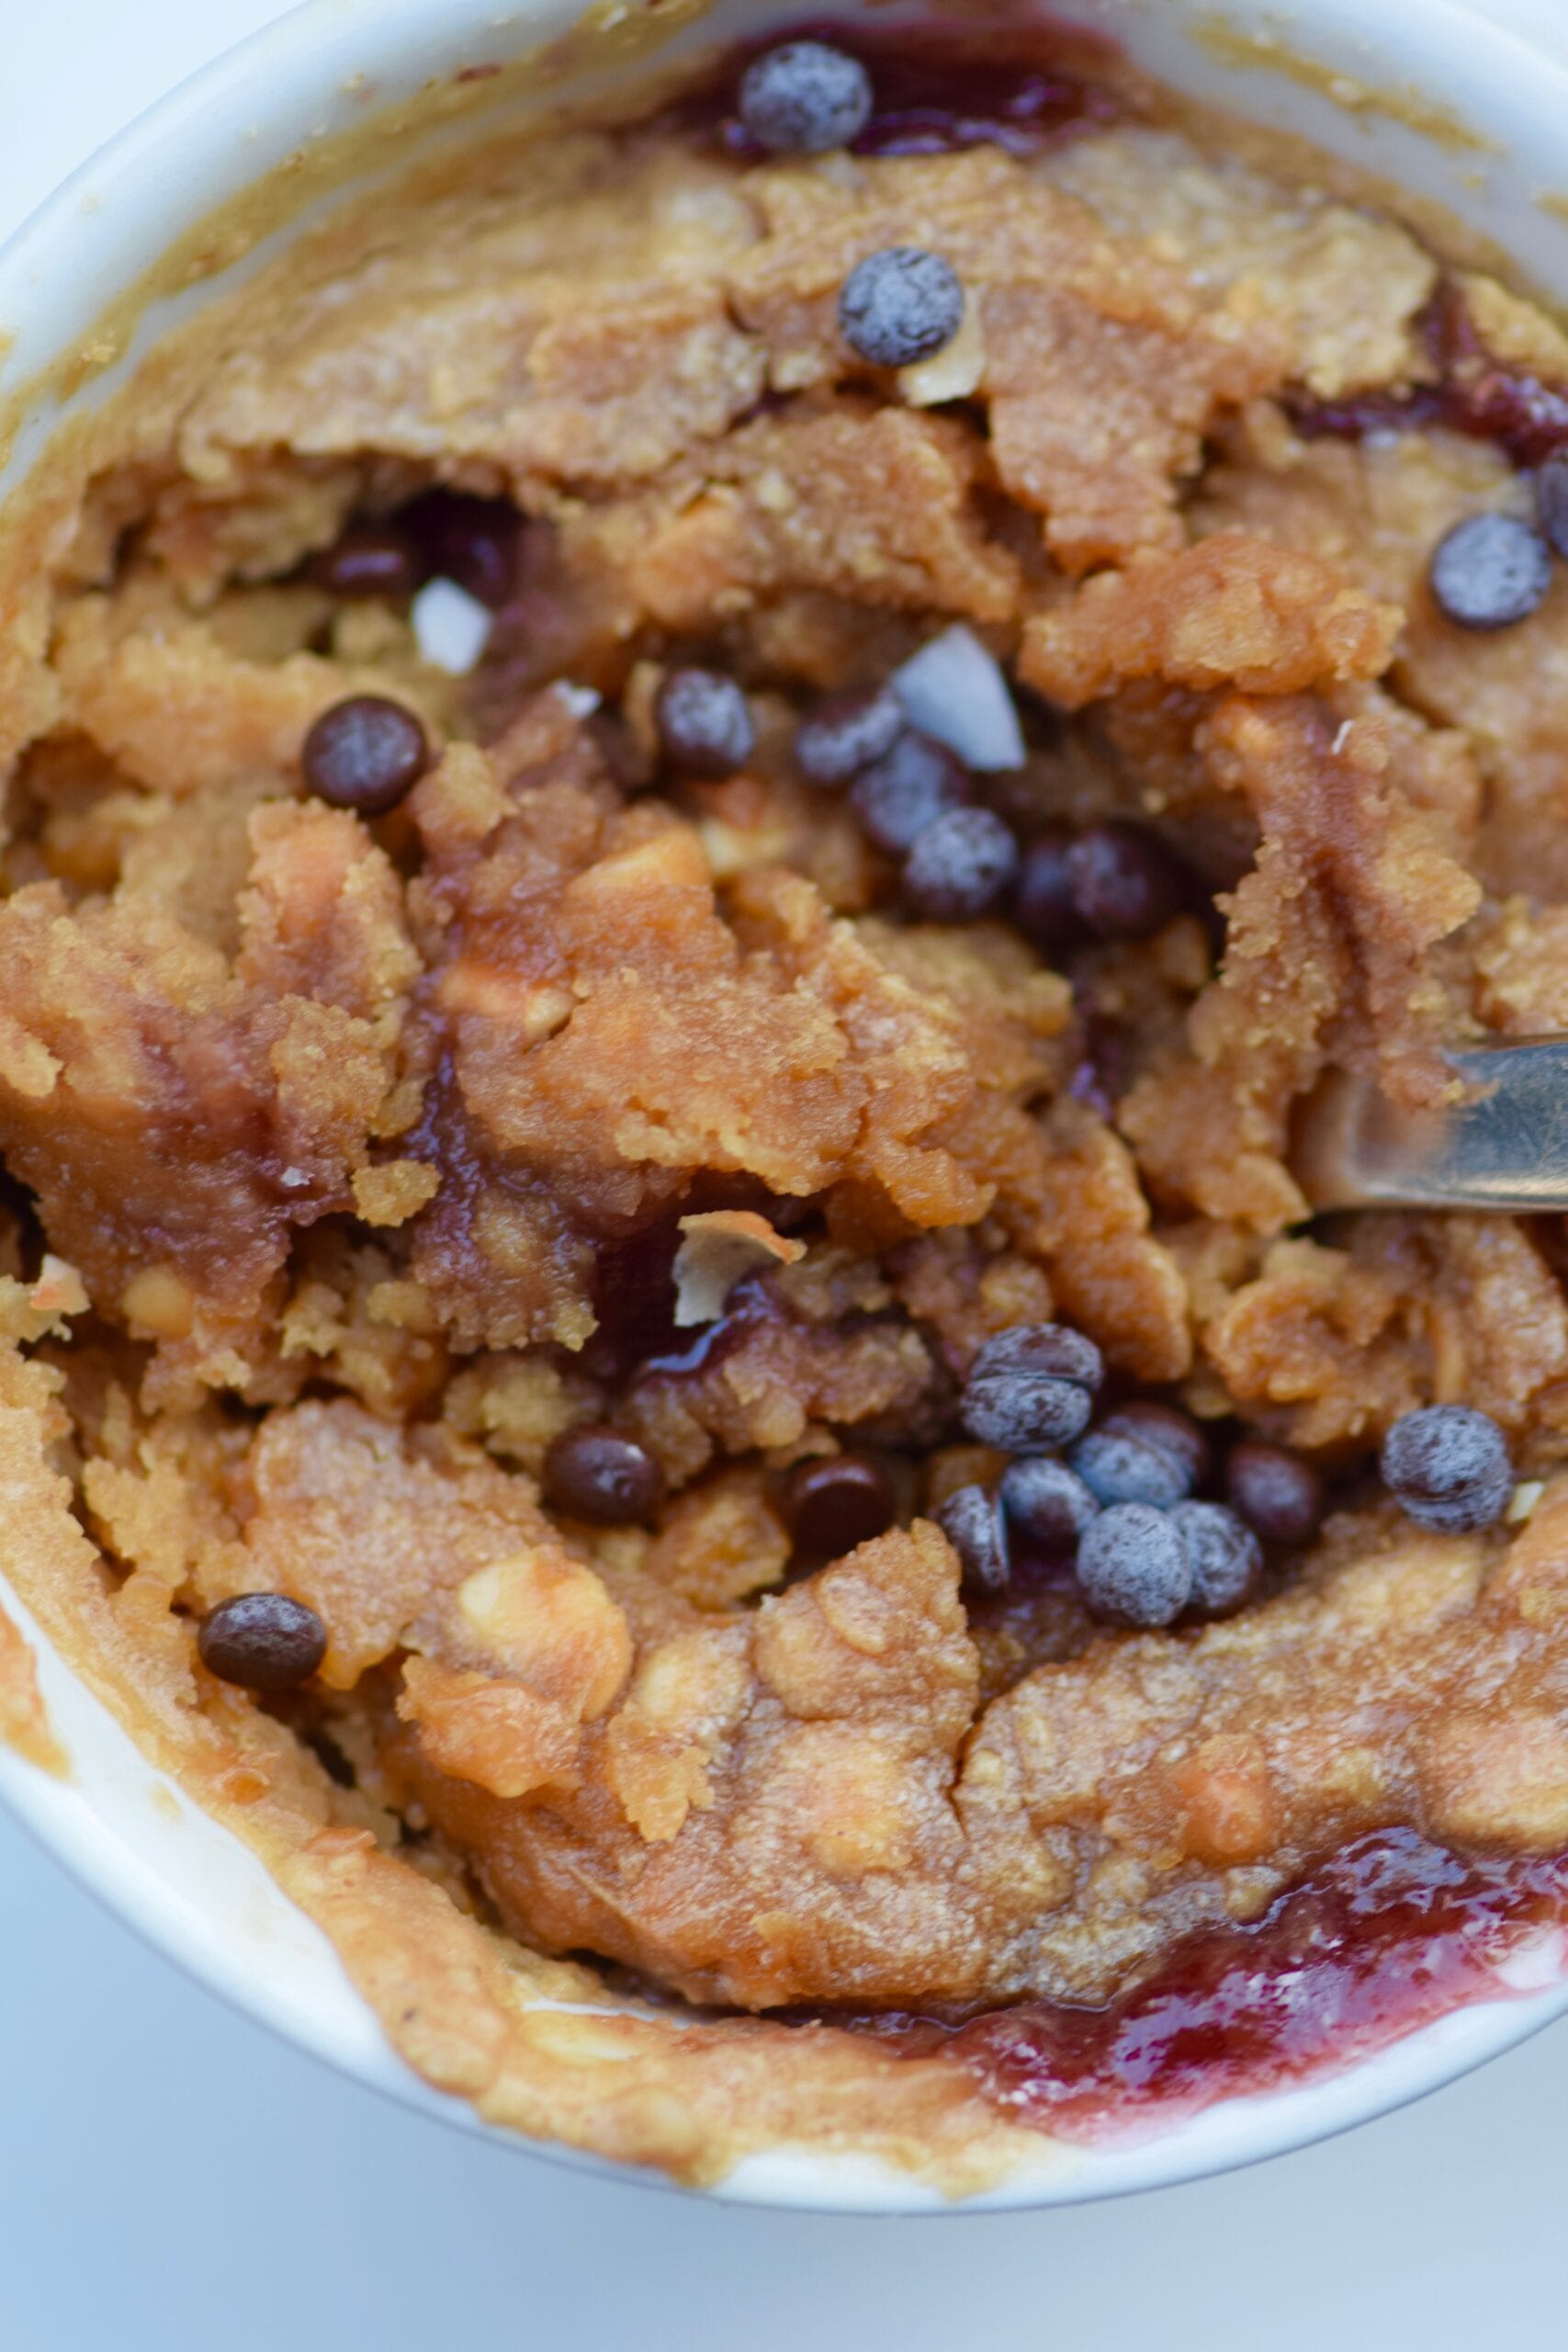 Peanut butter and jelly mug cake with chocolate chips